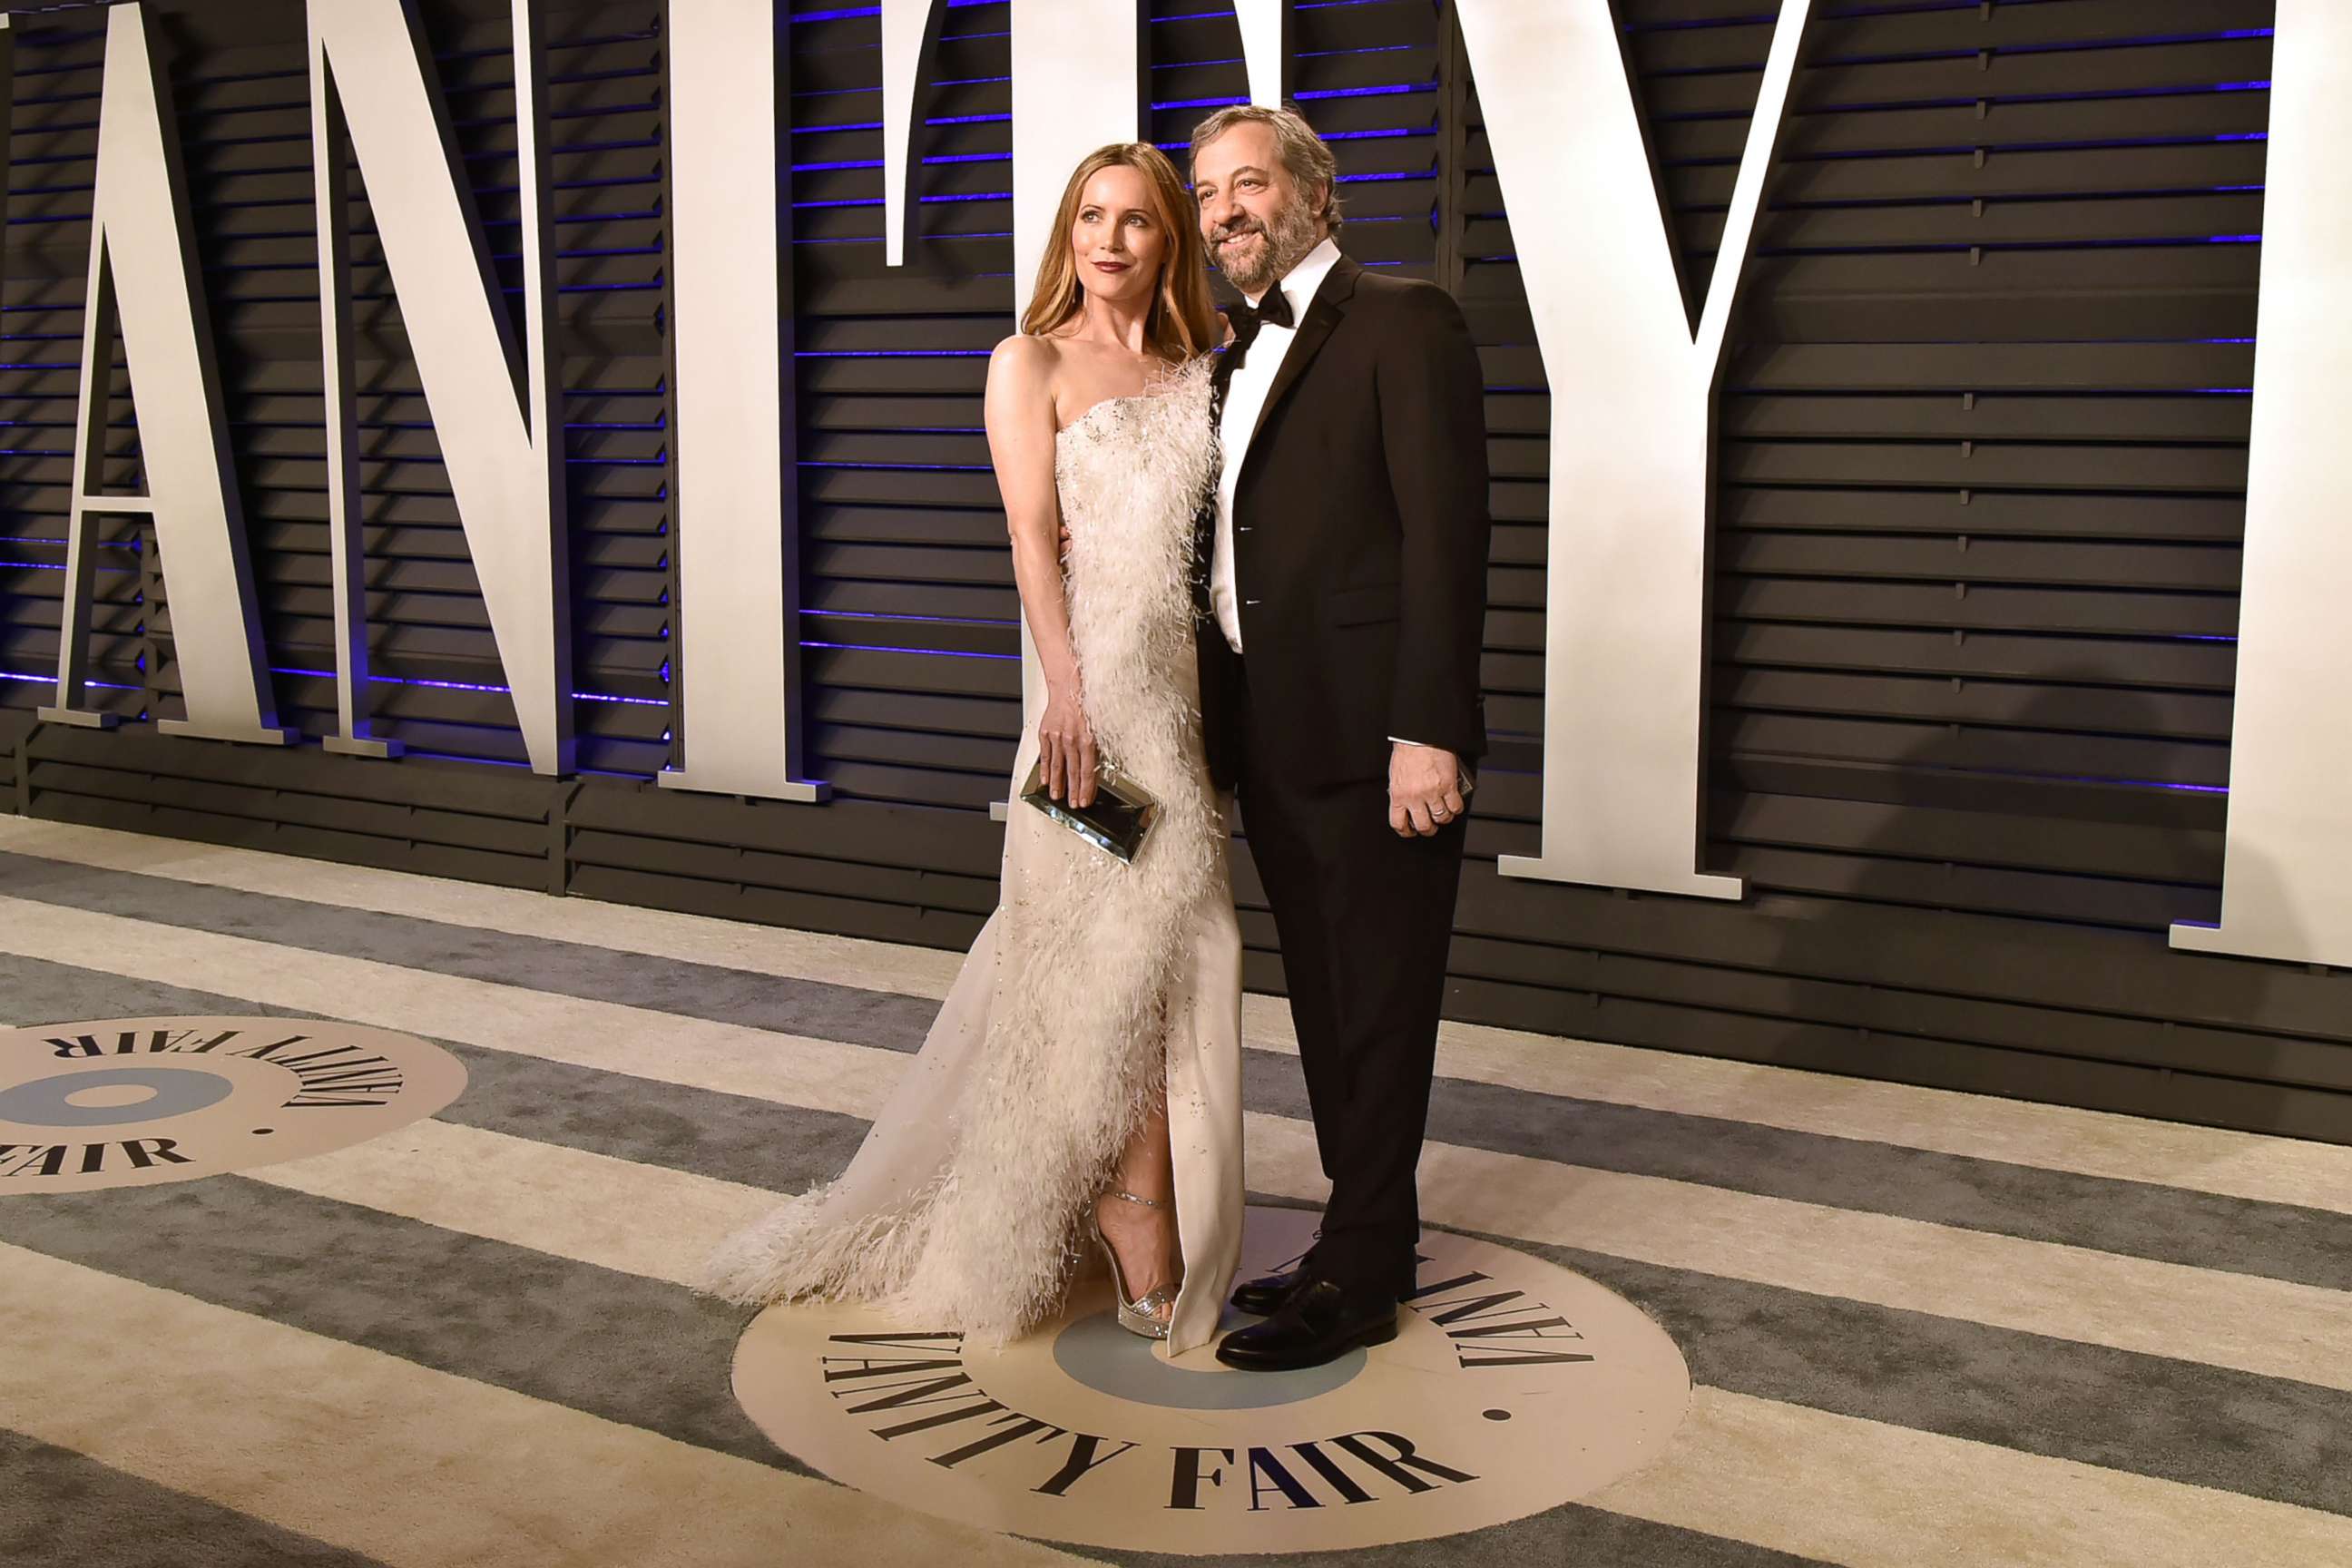 PHOTO: Leslie Mann and Judd Apatow attend the 2019 Vanity Fair Oscar Party hosted by Radhika Jones at Wallis Annenberg Center for the Performing Arts, Feb. 24, 2019, in Beverly Hills, Calif.